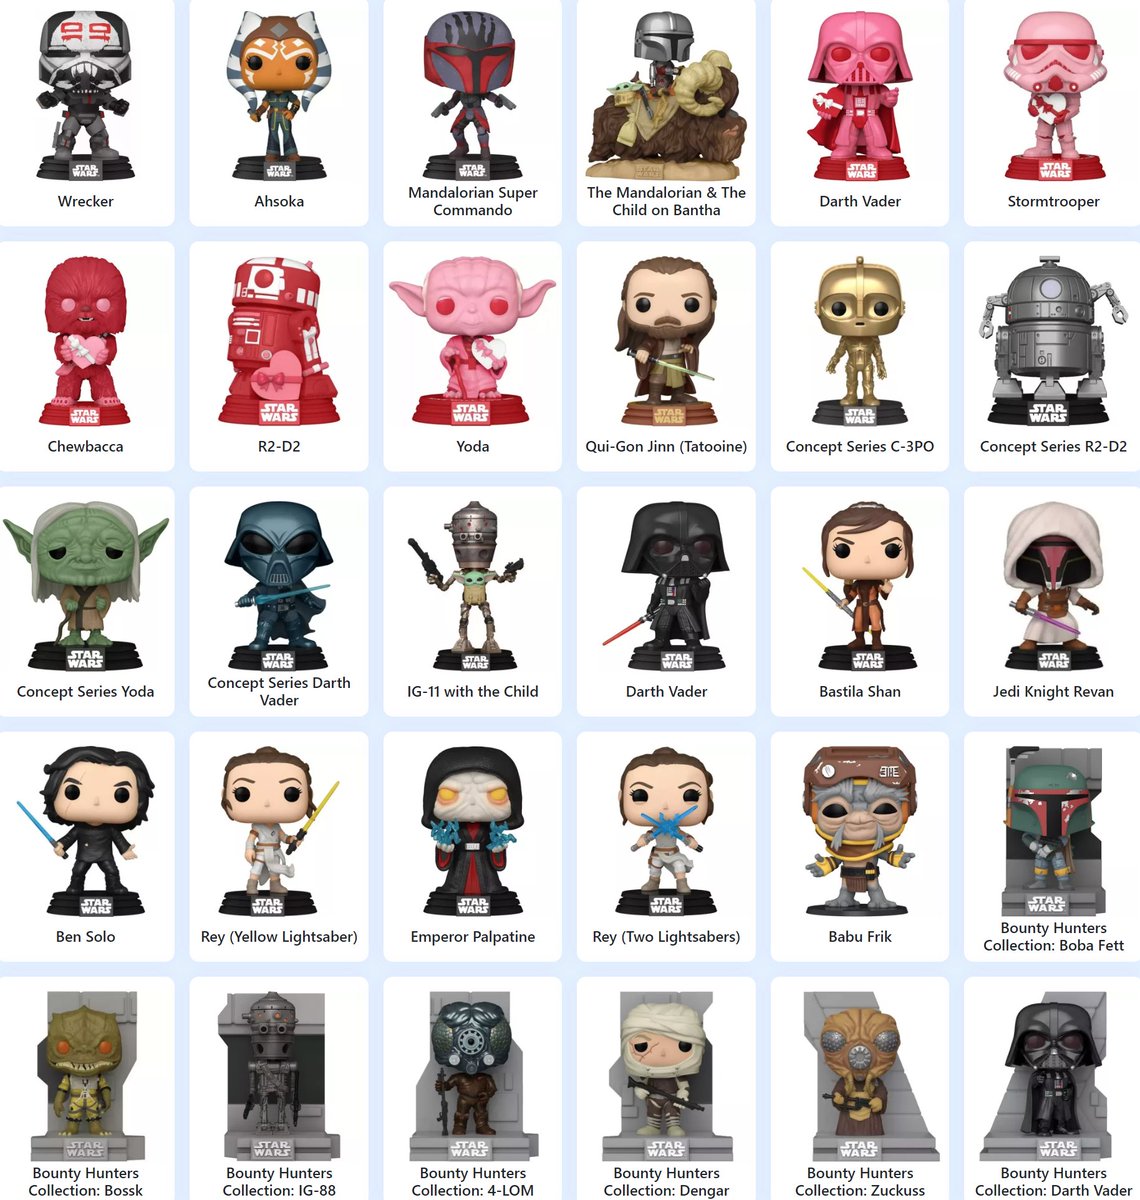 'He means more to me than you will ever know'
Added 86 more Star Wars POPs to my Website called POP's Today!
pops.today/category/star-…
Happy Collecting!
#FunkoPop #Funko #POP #StarWars #40TheEmpireStrikesBack #TheMandalorian #TheCloneWars #TheRiseofSkywalker #POPsToday
@POPs_Today